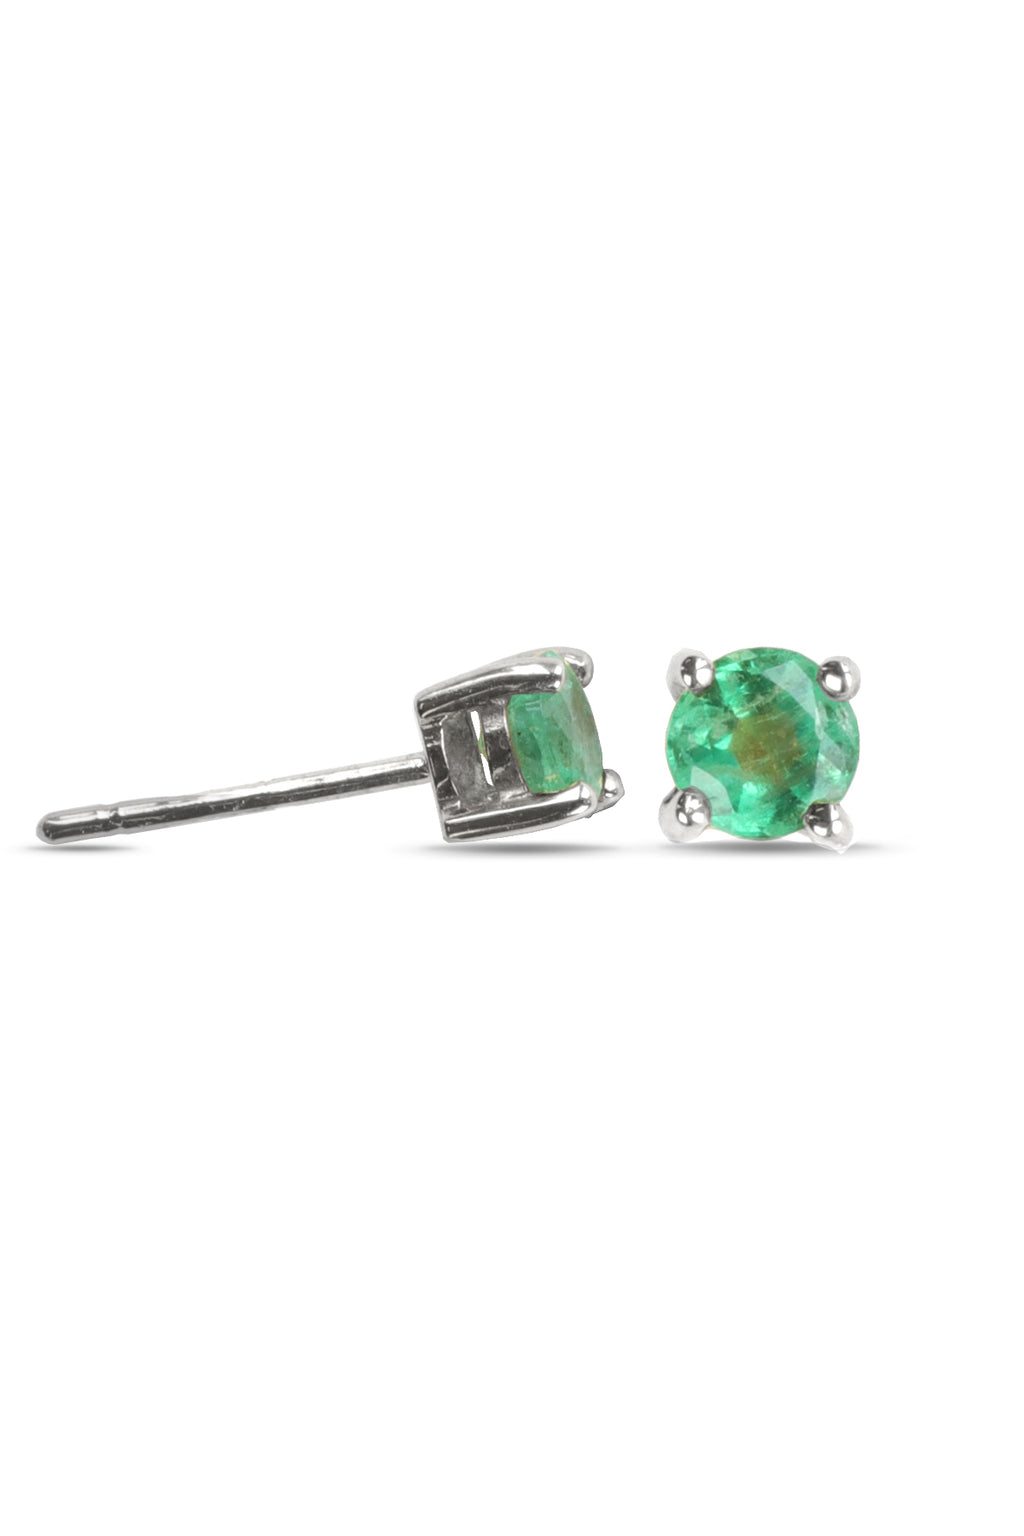 9ct White Gold Emerald Earring